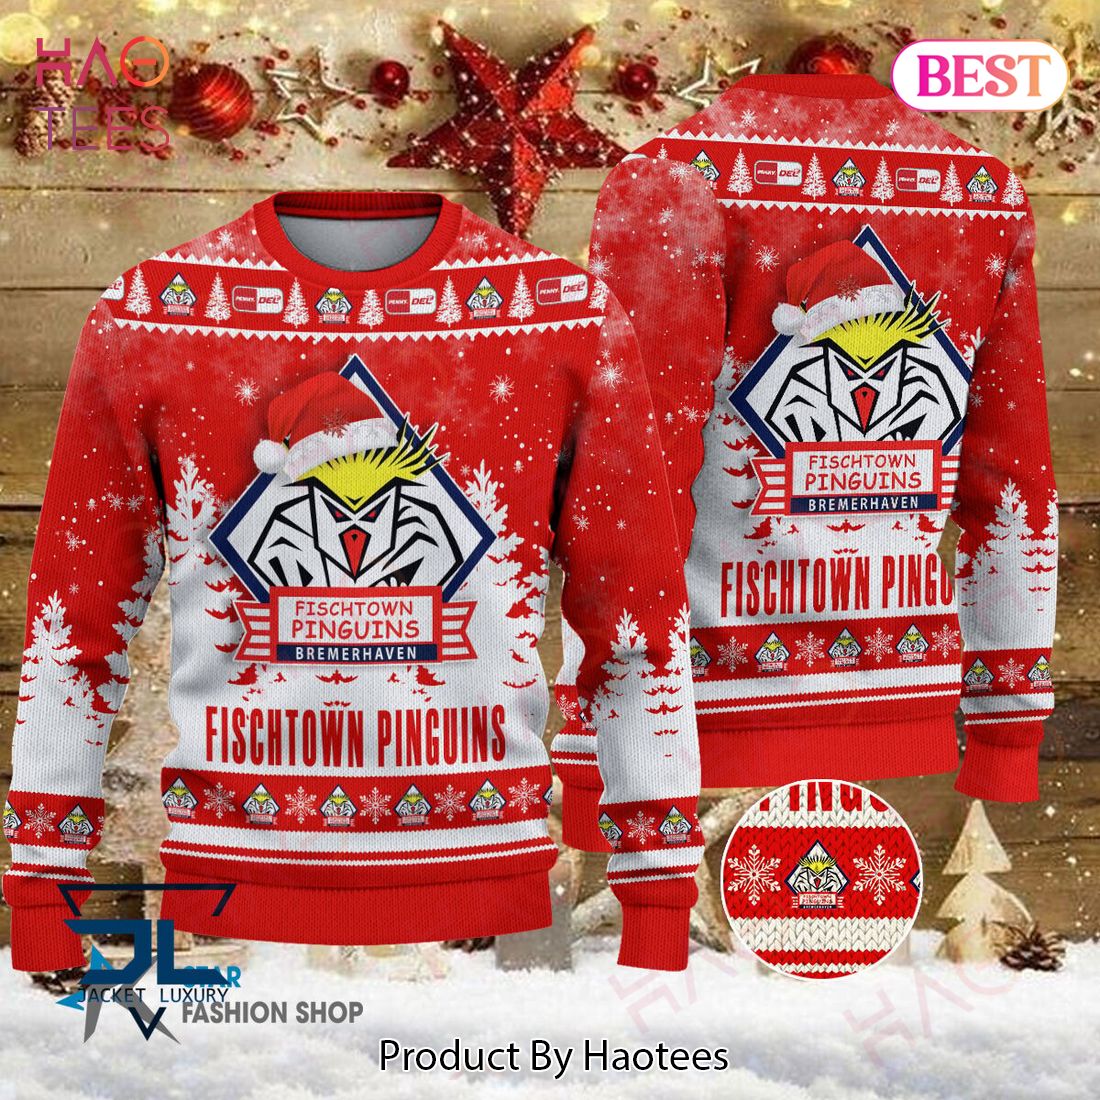 BEST Fischtown Pinguins Red Mix White Luxury Brand Sweater Limited Edition